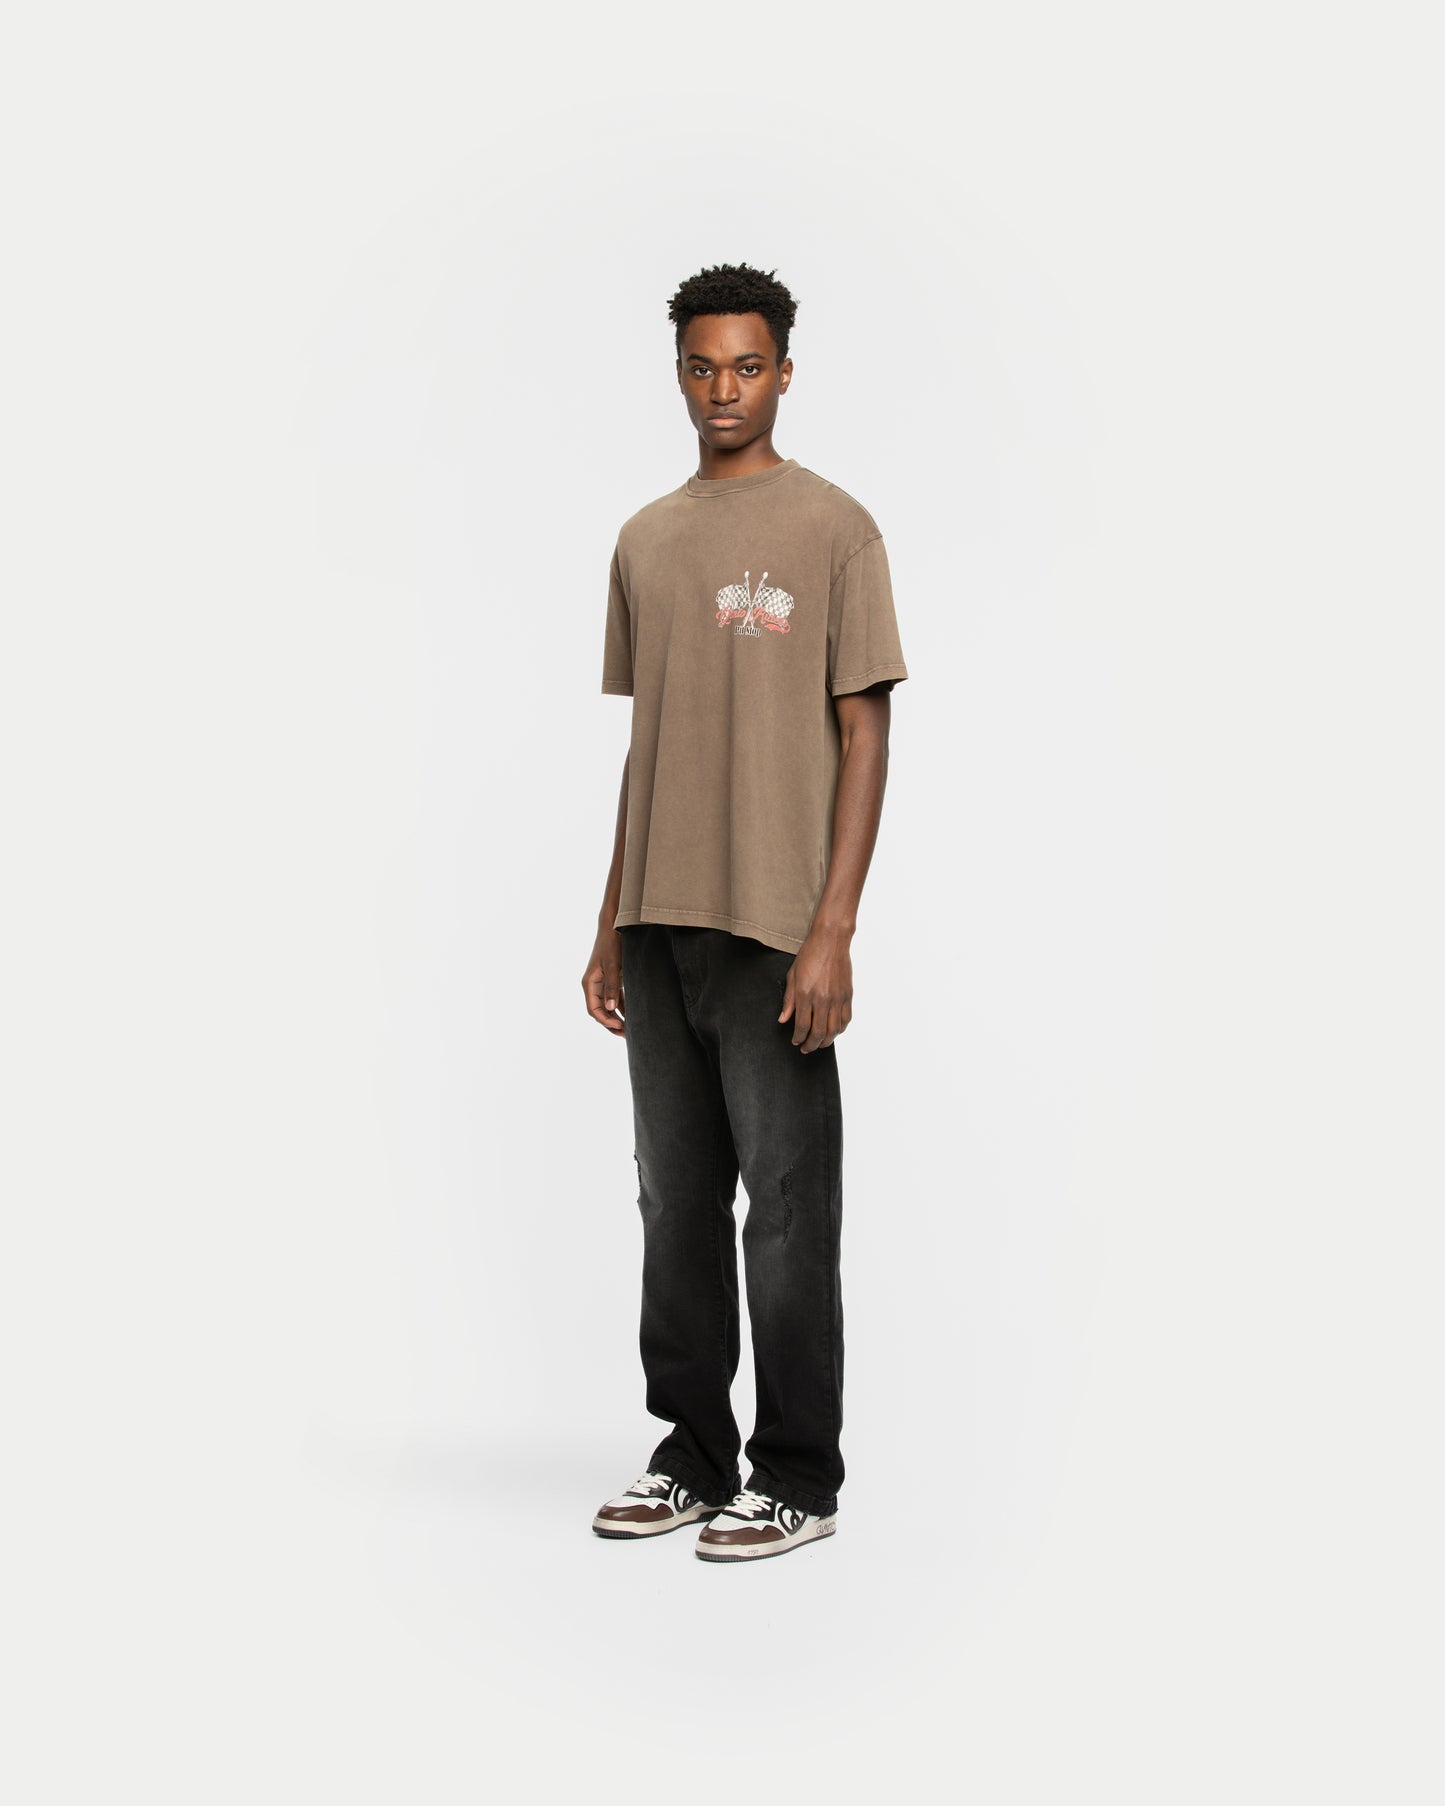 PIT STOP T-SHIRT MAD BROWN